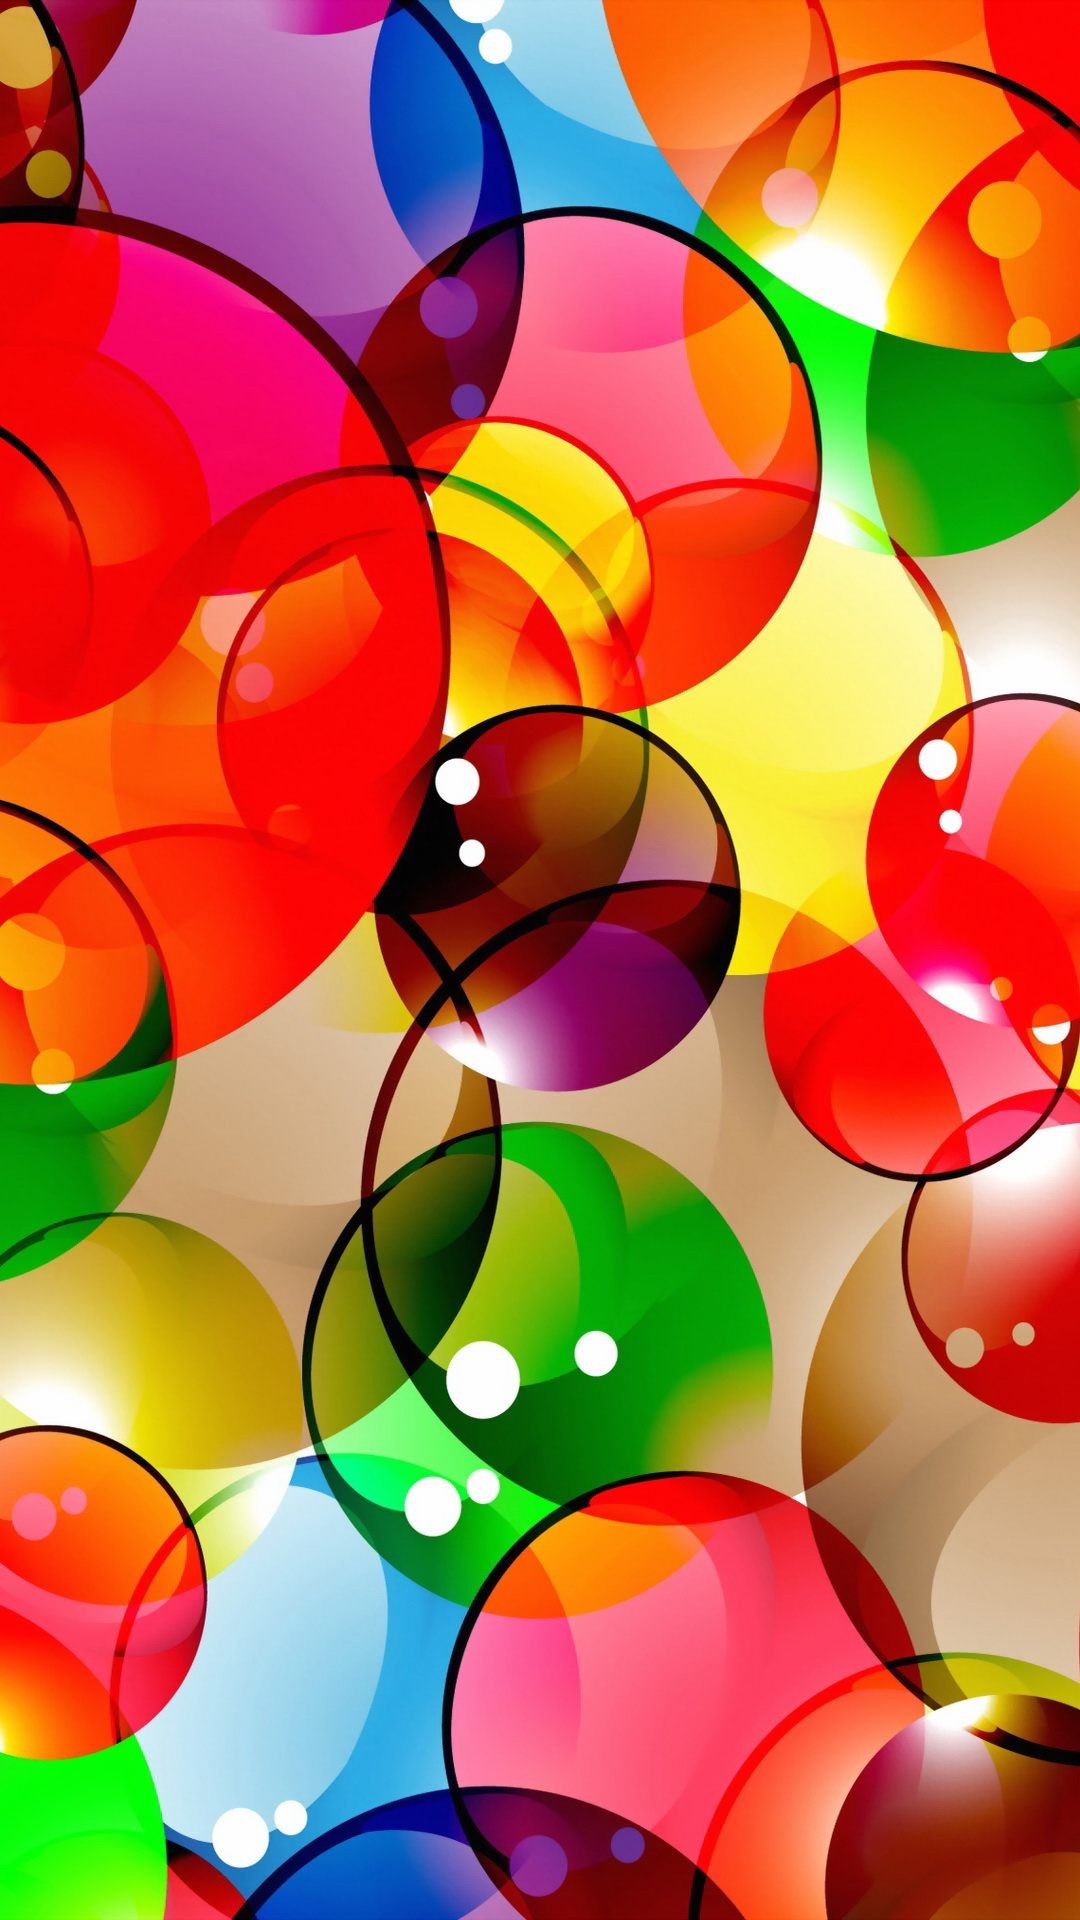 colorful iphone wallpaper,pattern,colorfulness,design,circle,material property